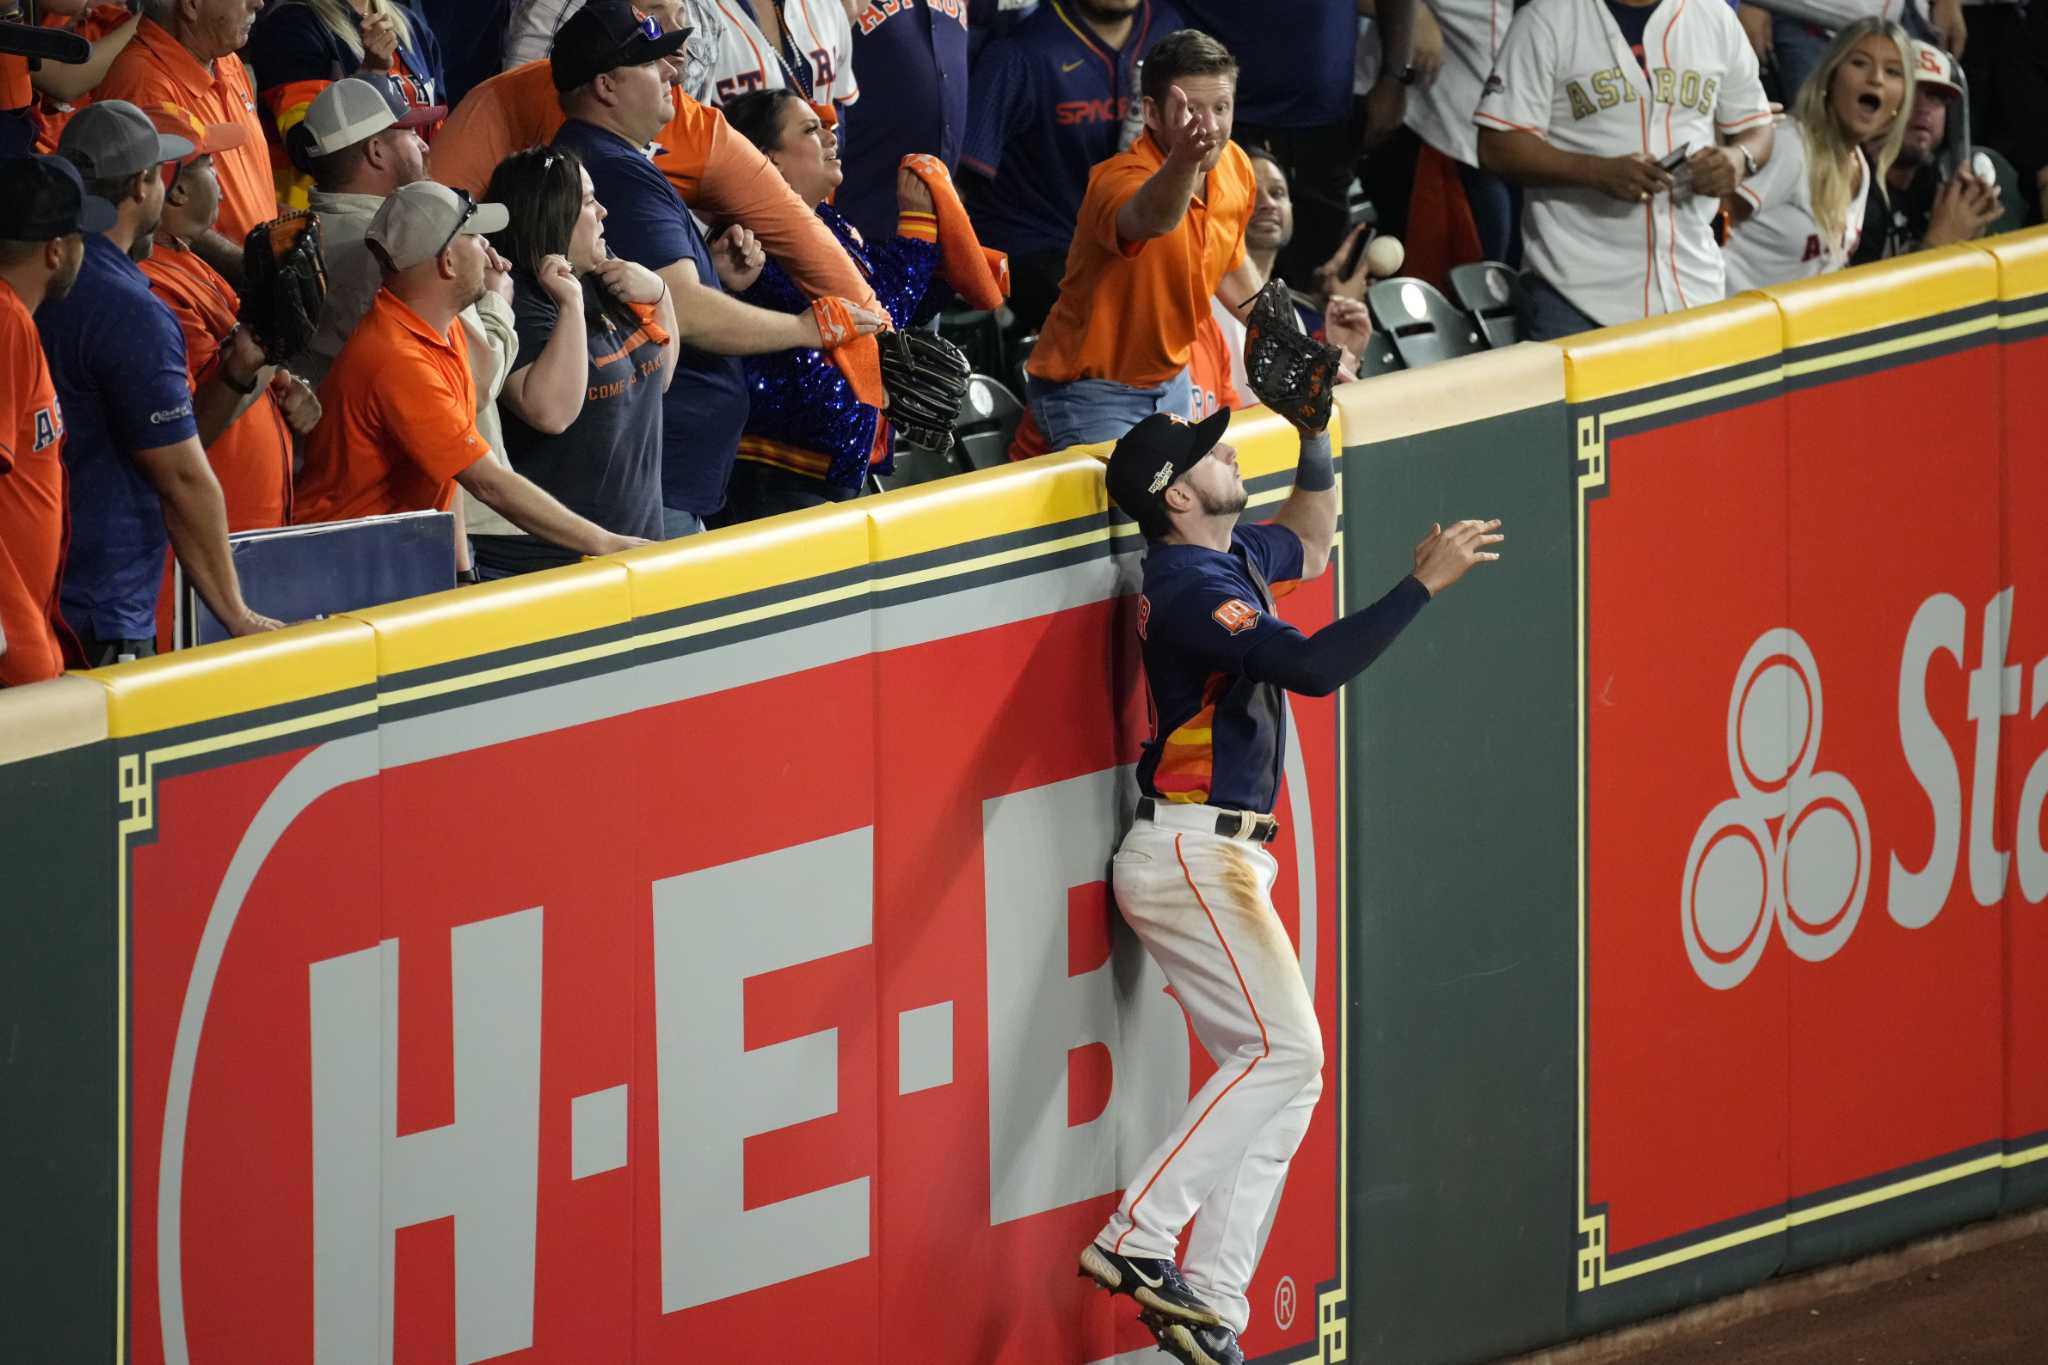 Giancarlo Stanton turns boos into cheers with two-run homer